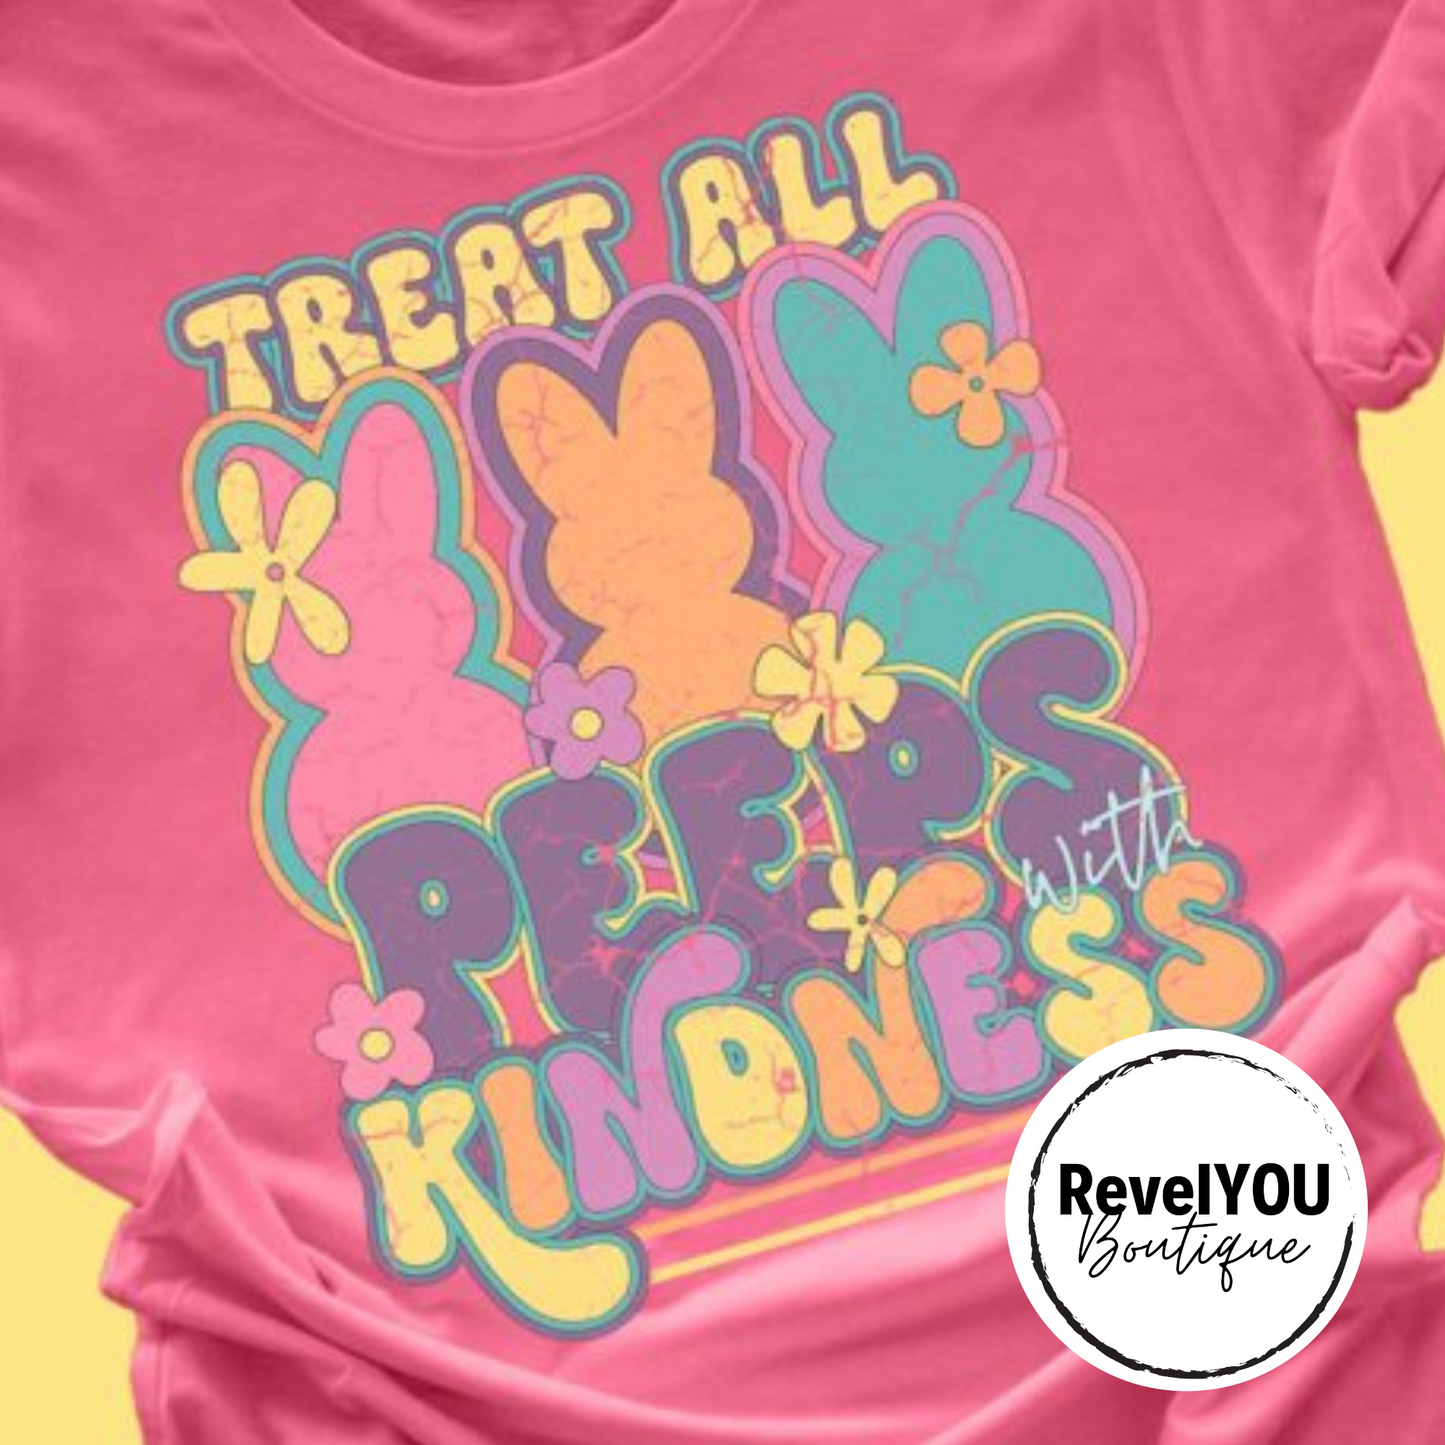 Treat All Peeps With Kindness